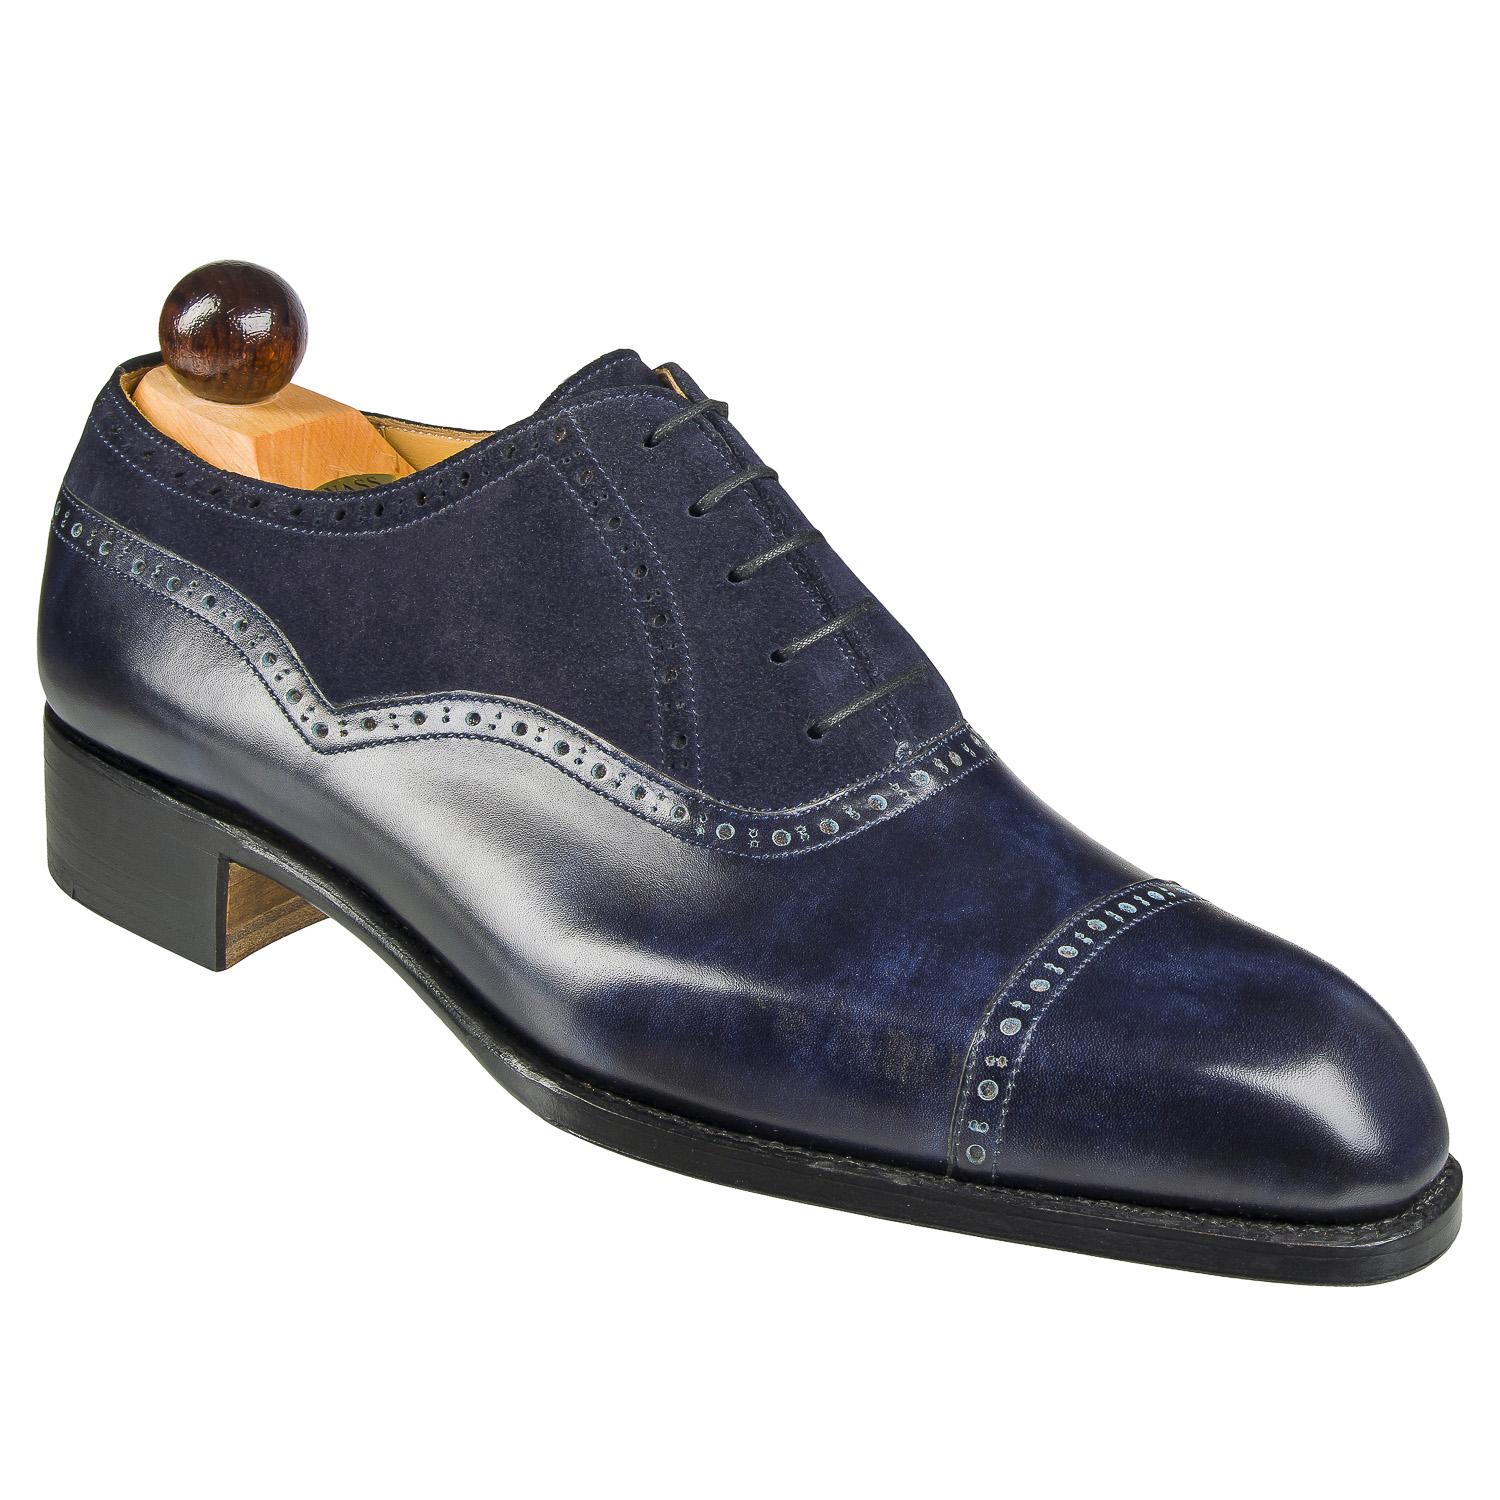 Old English II - Blue Museum Calf / Blue Suede